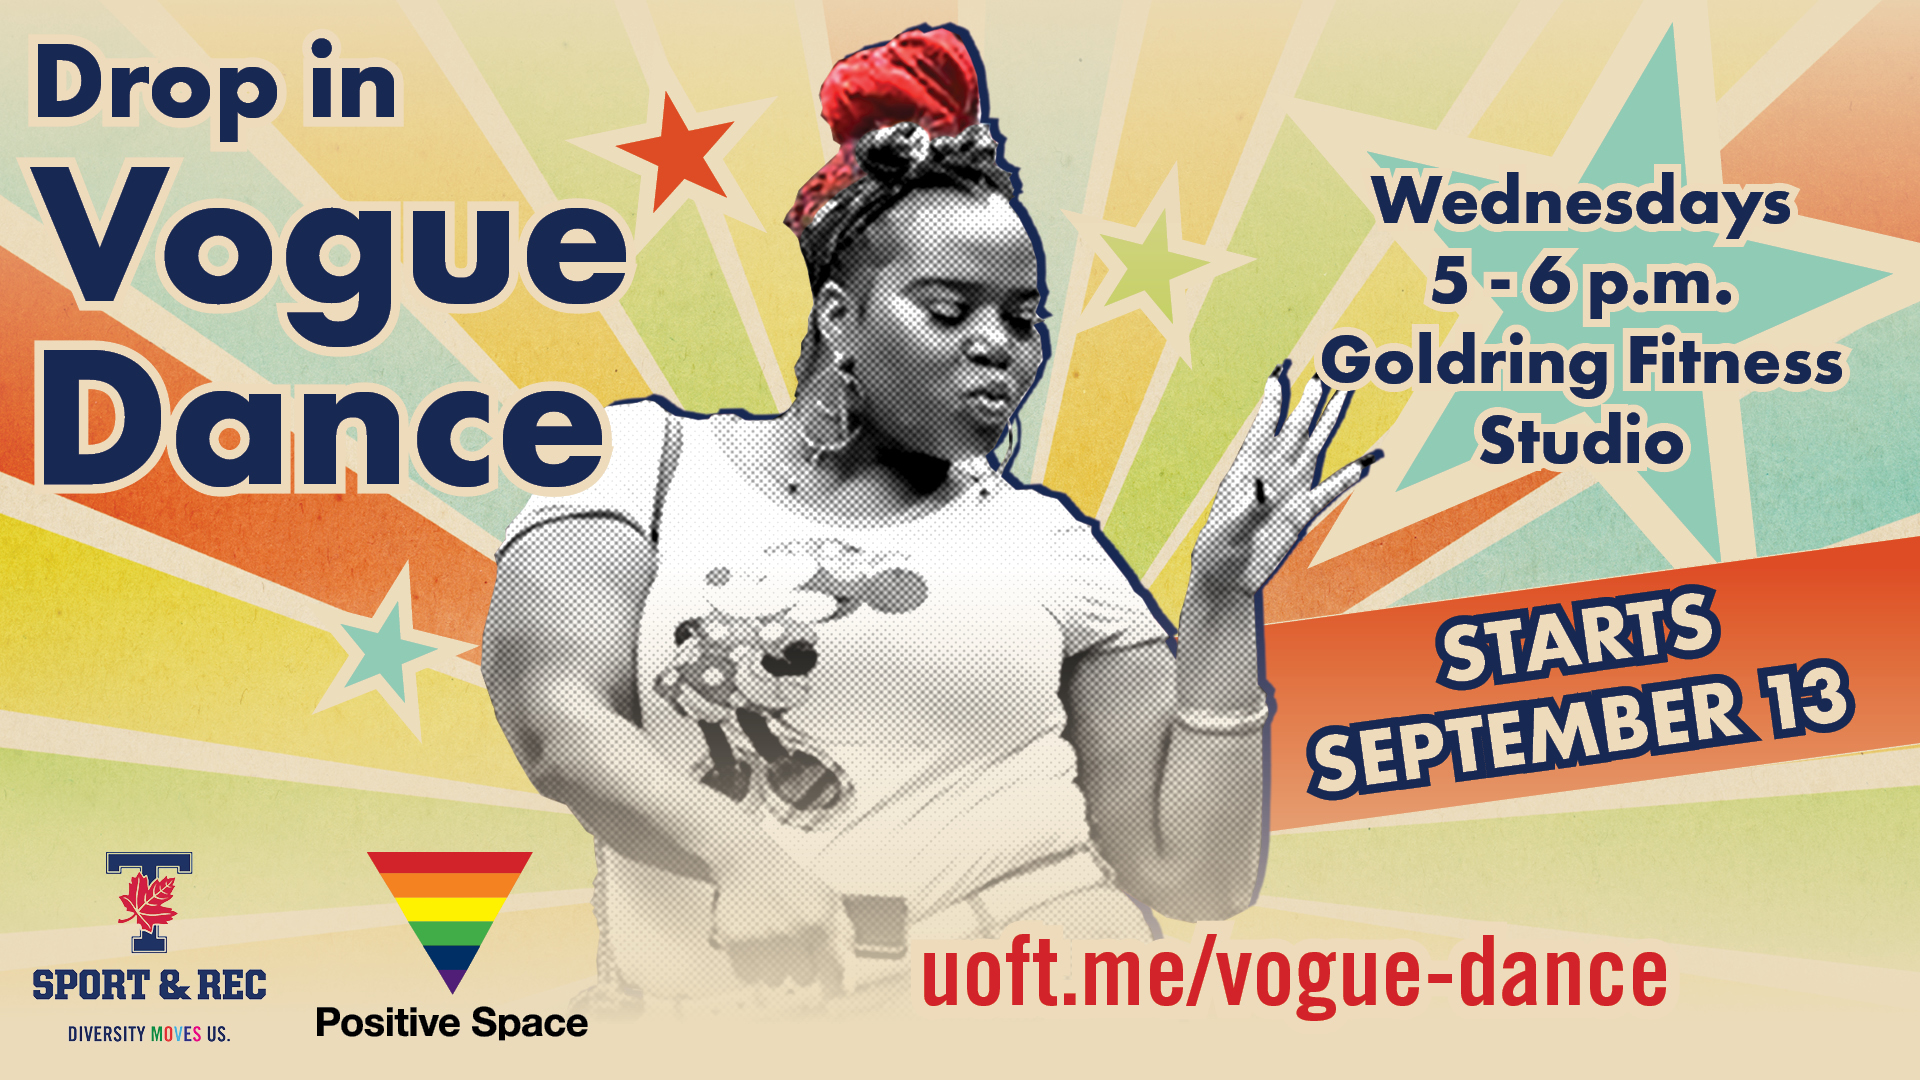 Drop-in Vogue Dance starts September 13! Wednesdays from 5-6 p.m. at Goldring Fitness Studio.